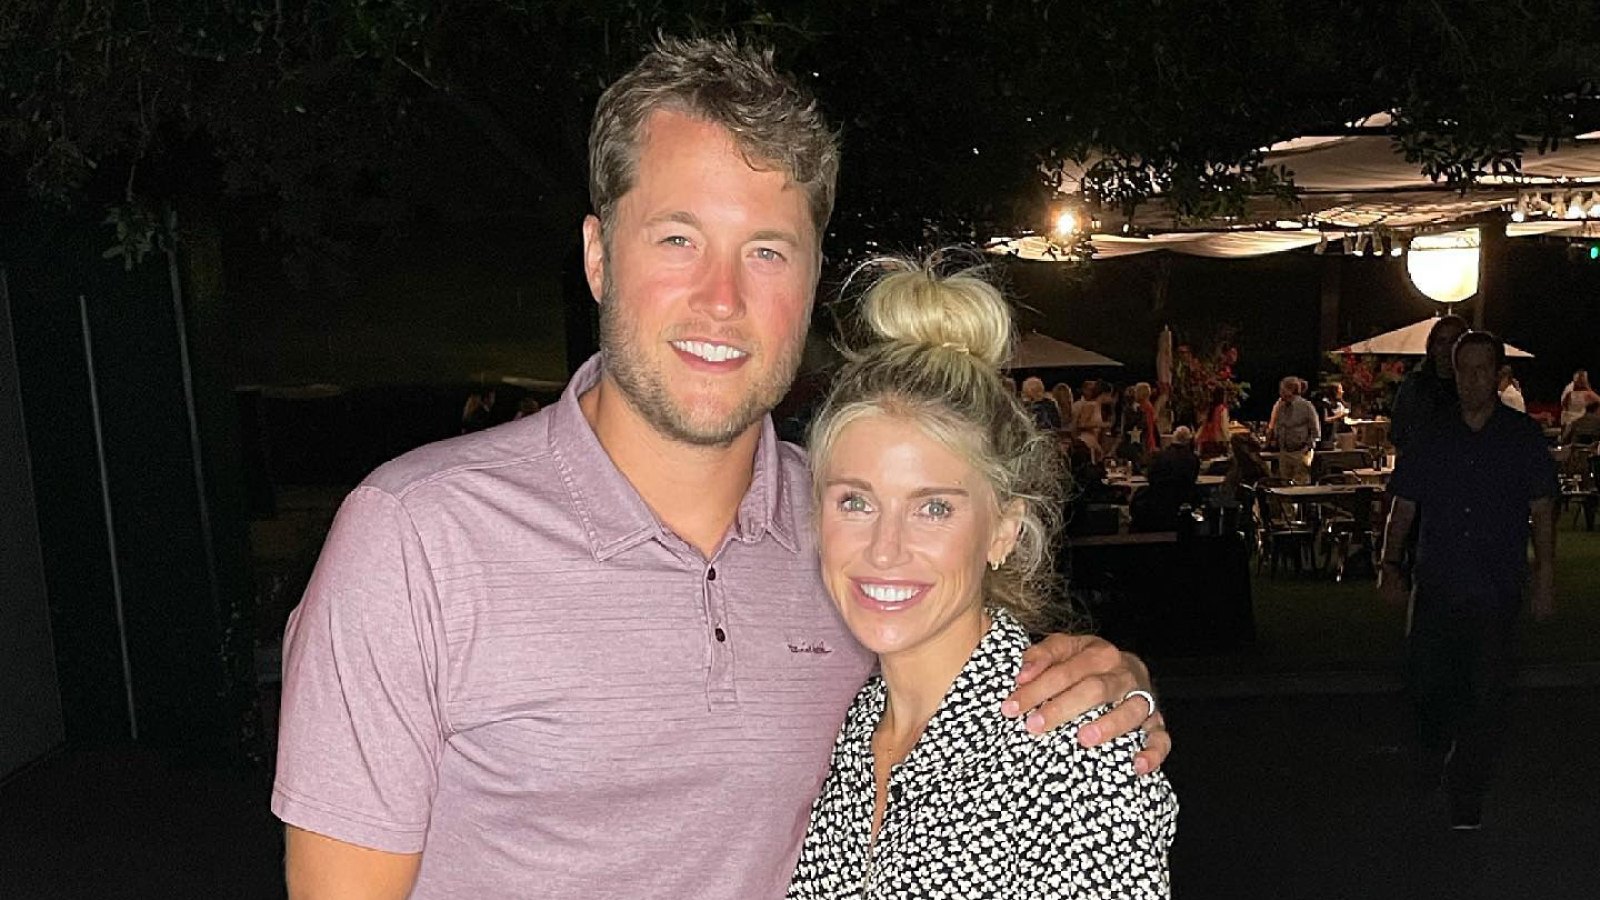 Kelly Stafford, wife of NFL star Matthew Stafford, opens up about